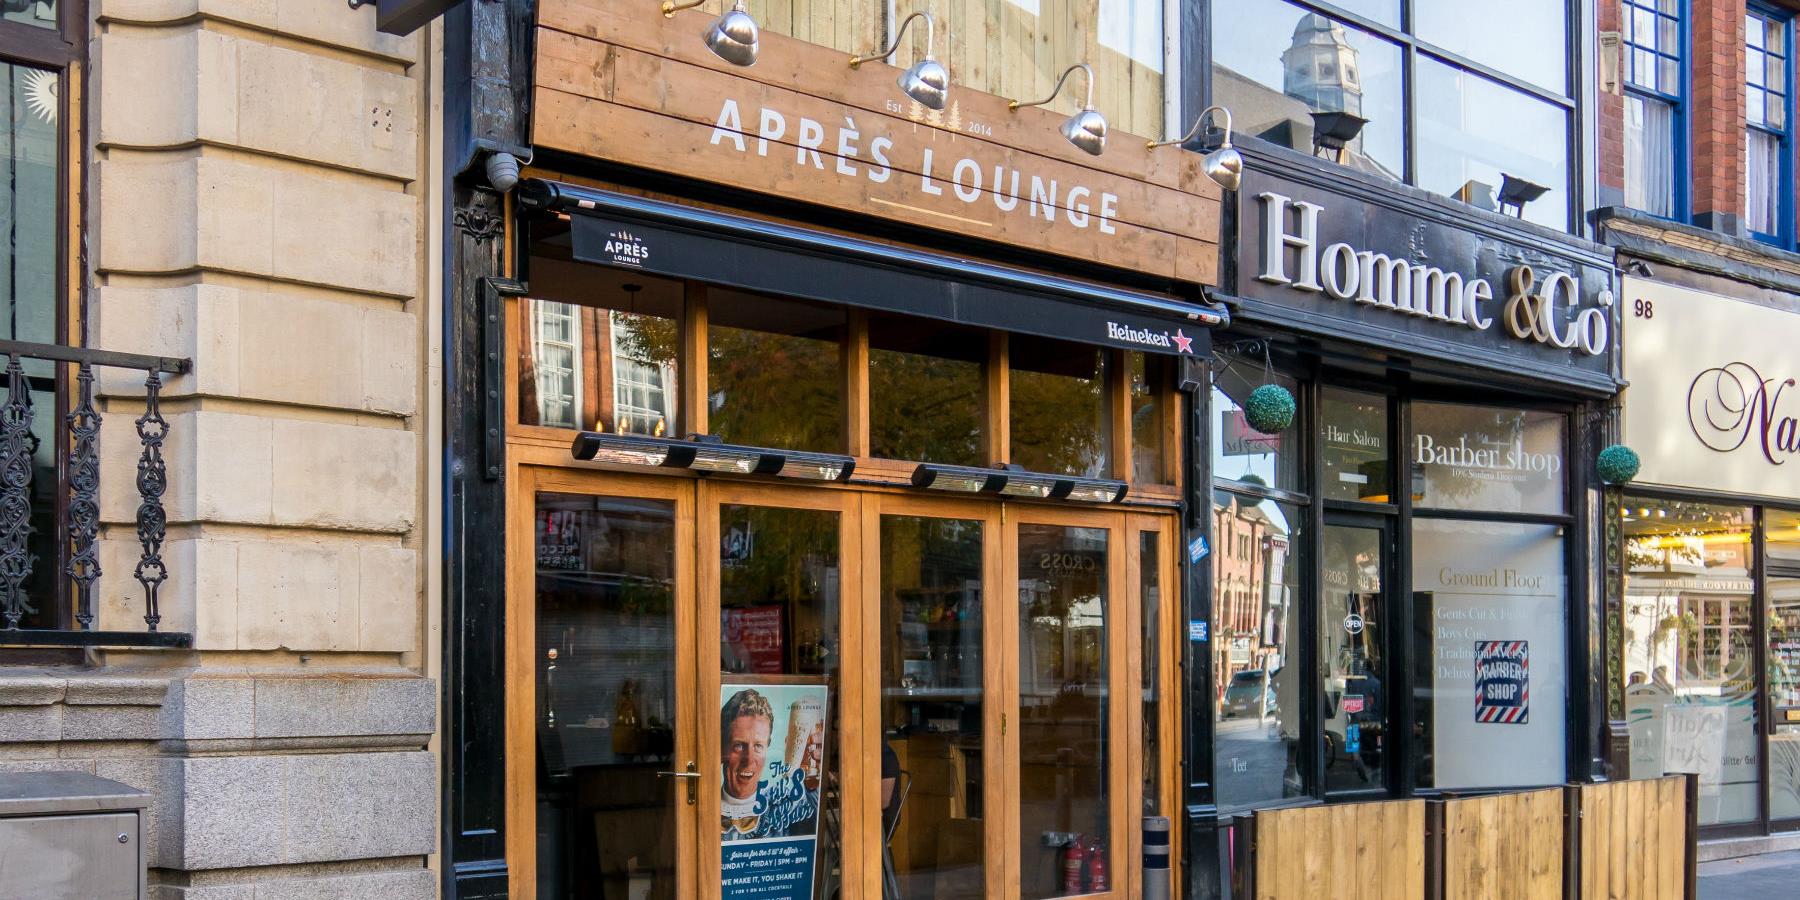 Apres Lounge - Bars, Eat & Drink in Leicester